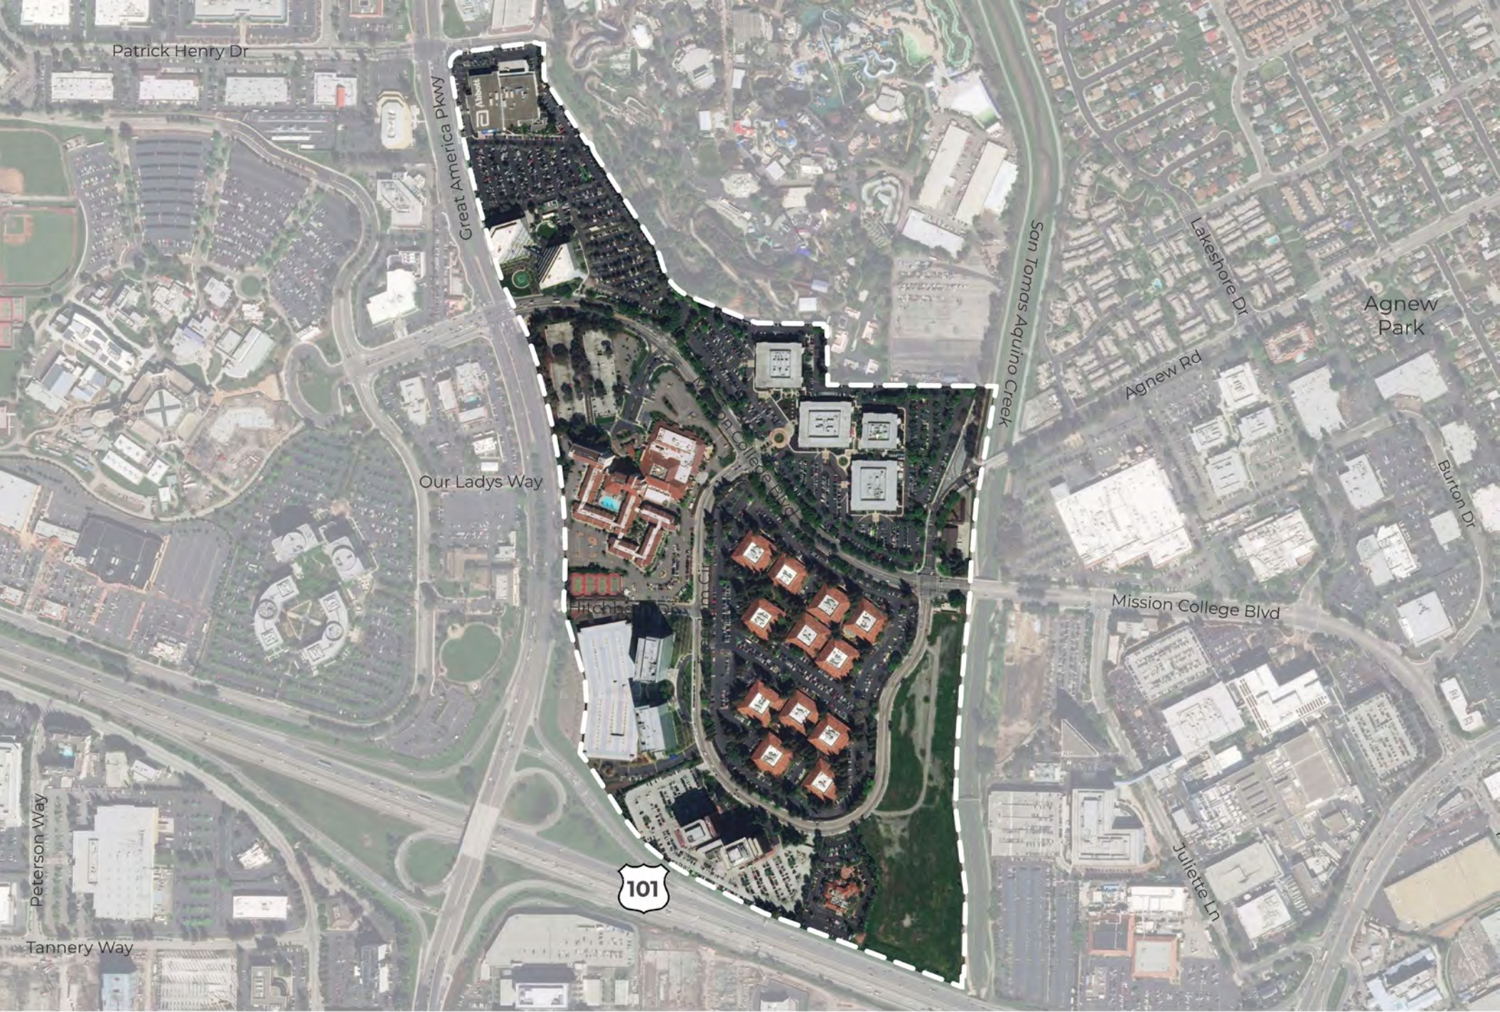 Freedom Circle General Plan Area, image via City Planning Documents